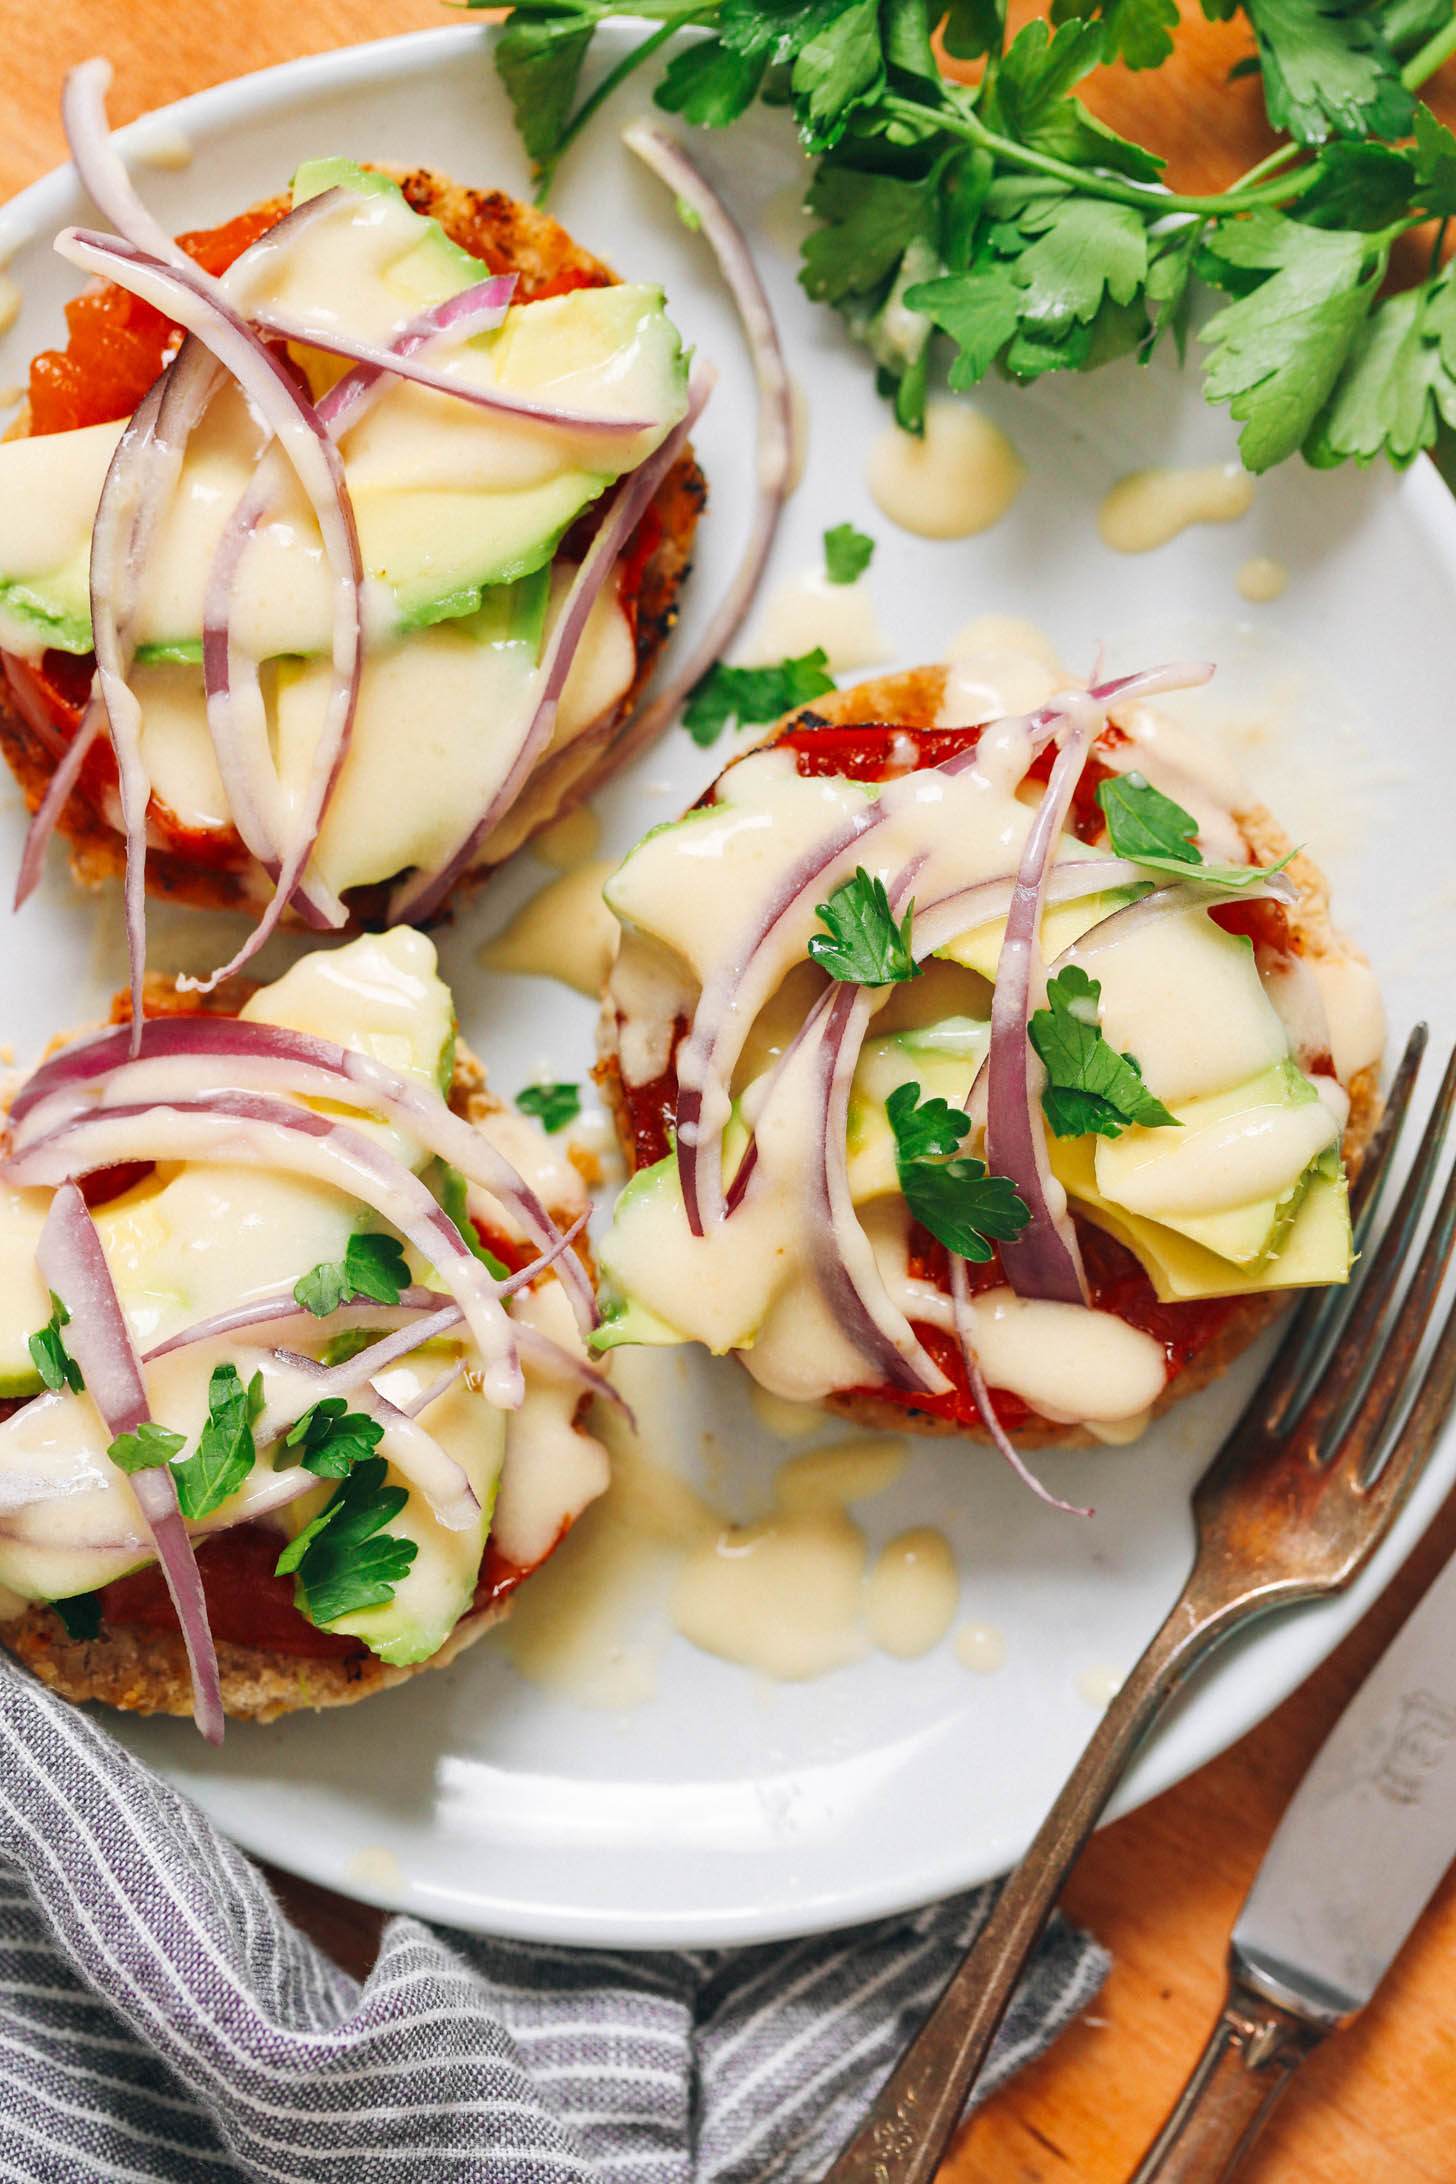 Top down shot of English muffins topped with seared tomatoes, avocado, red onion, parsley, and vegan hollandaise sauce